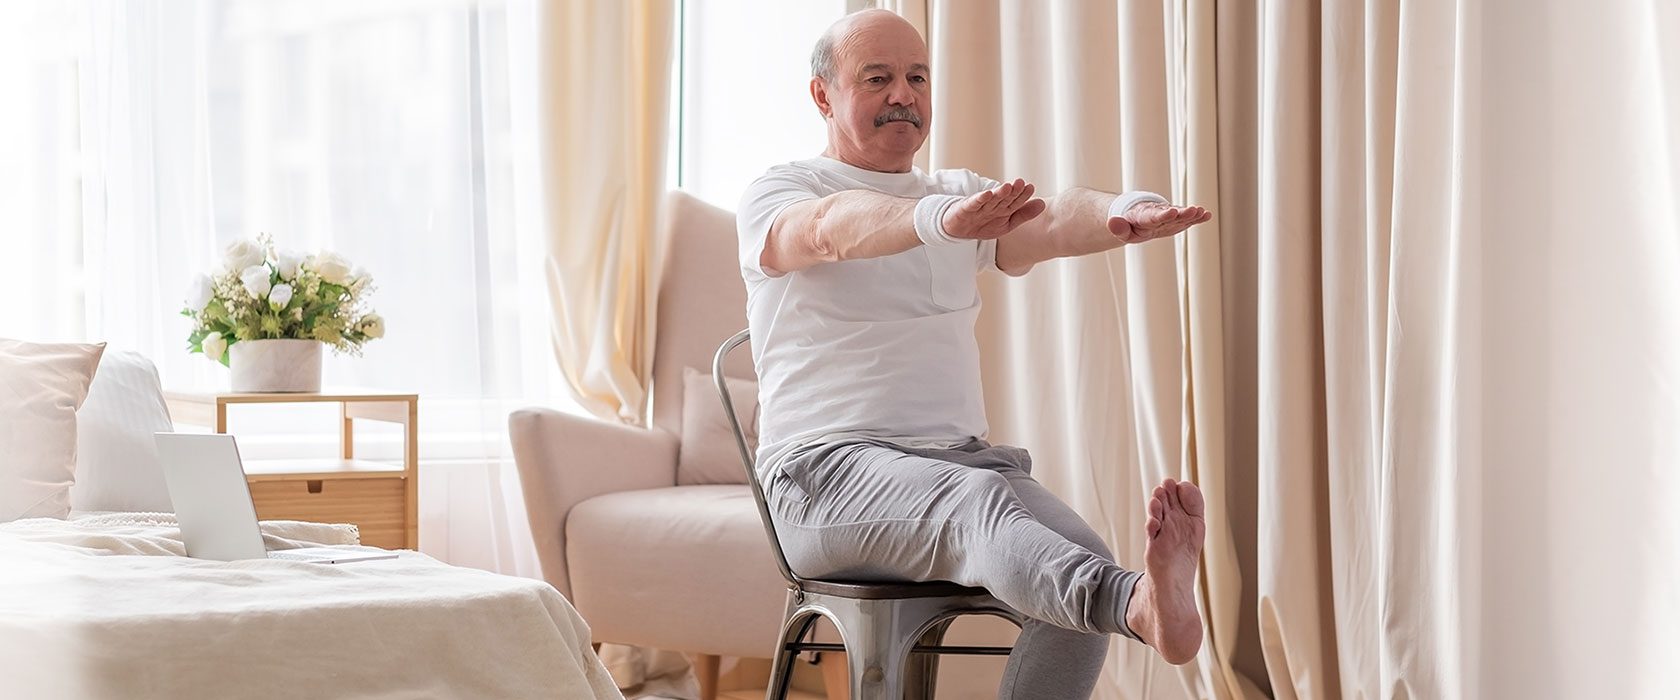 The Benefits of Chair Yoga for Seniors - ClearCaptions